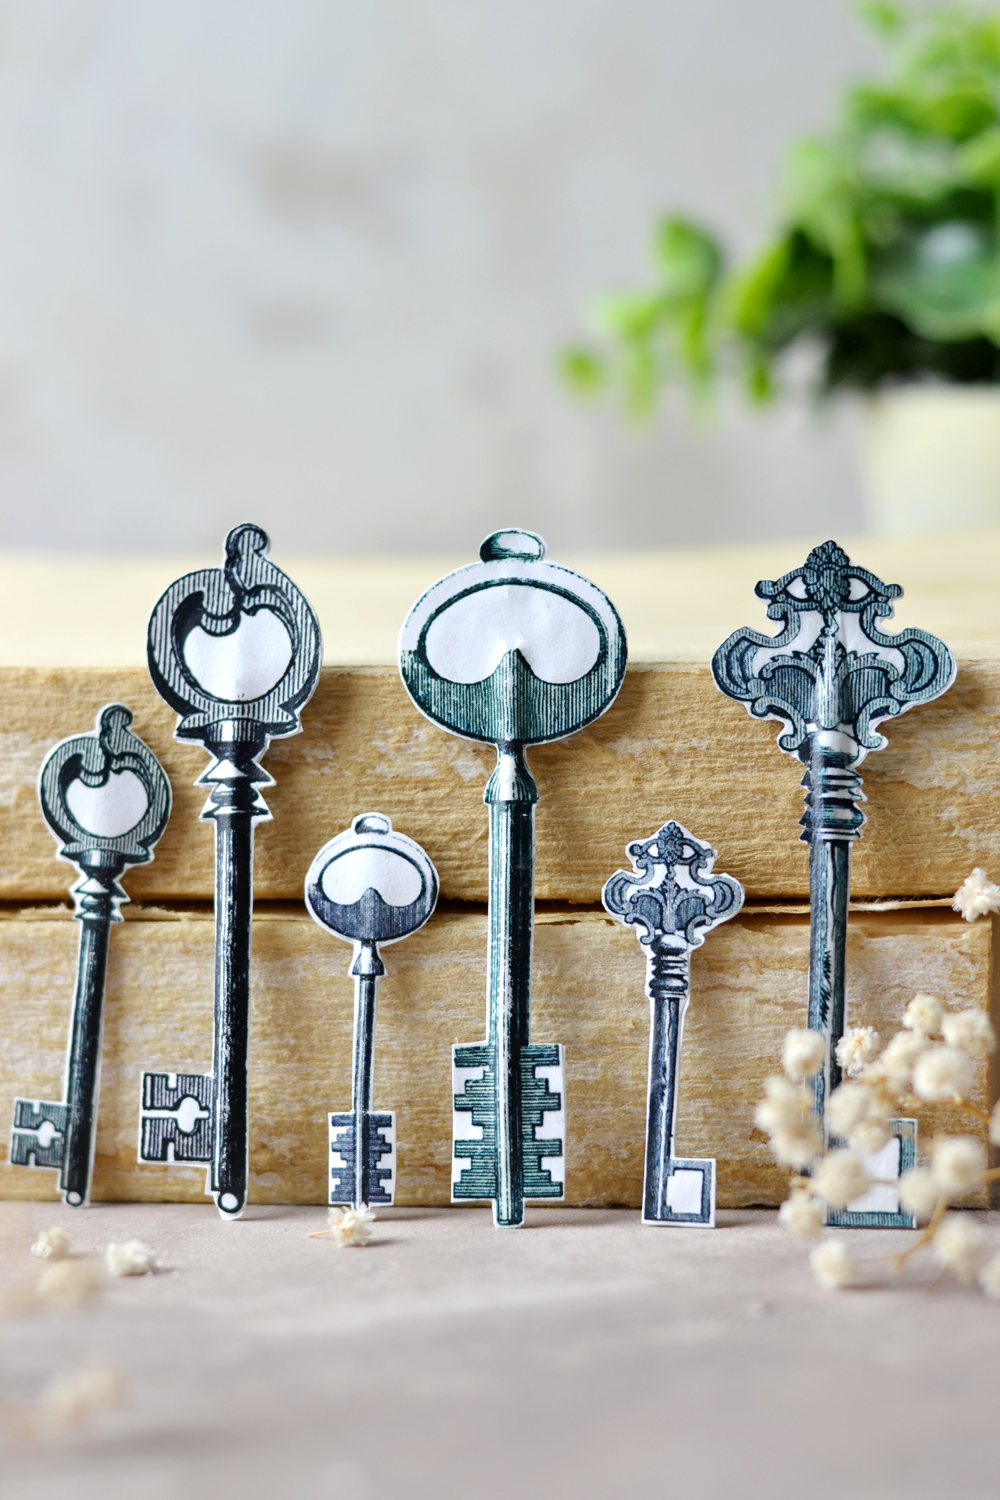 Paper keys with books